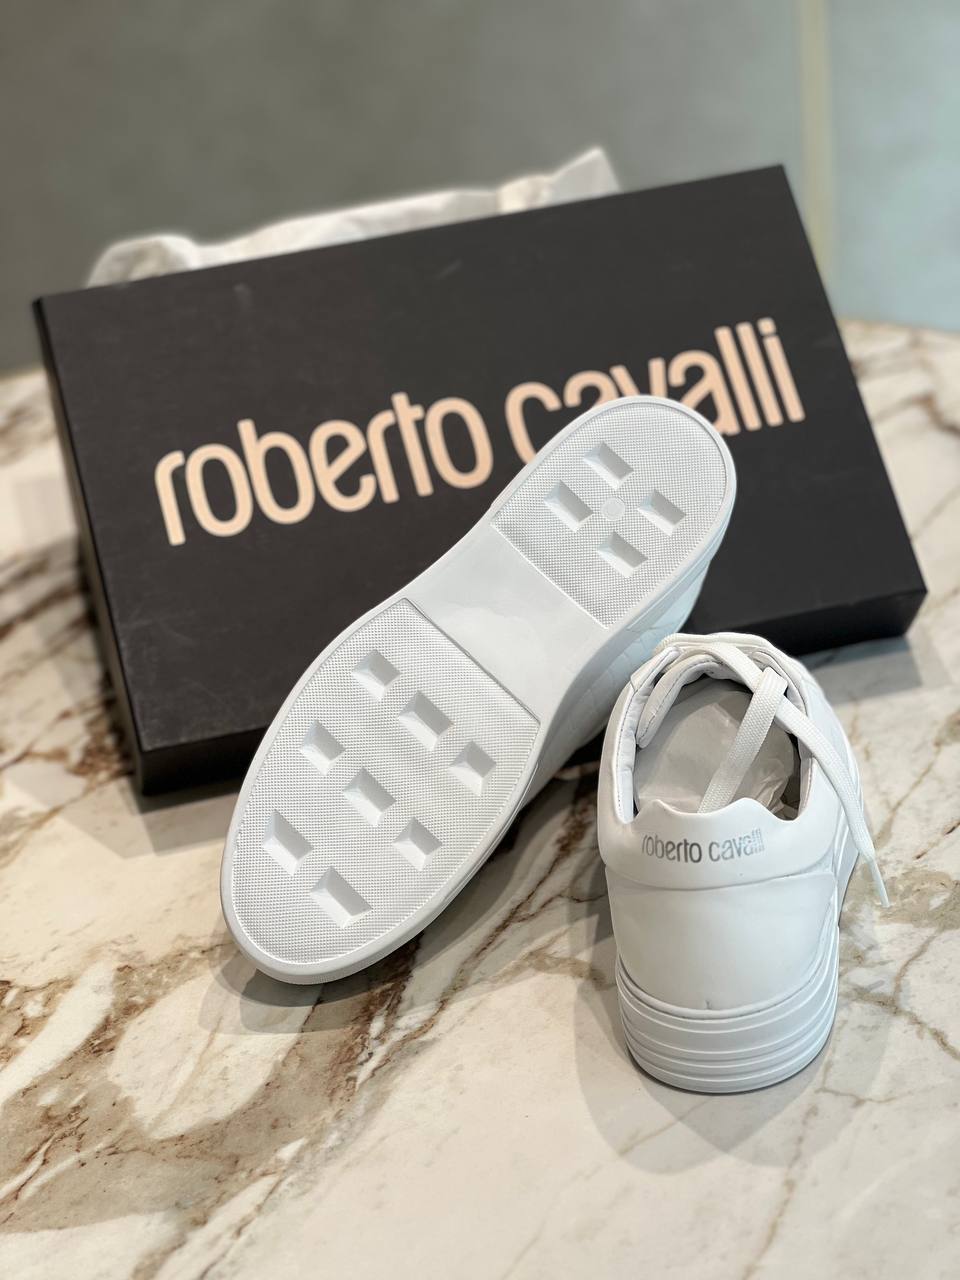 Roberto Cavalli Outlets 6130